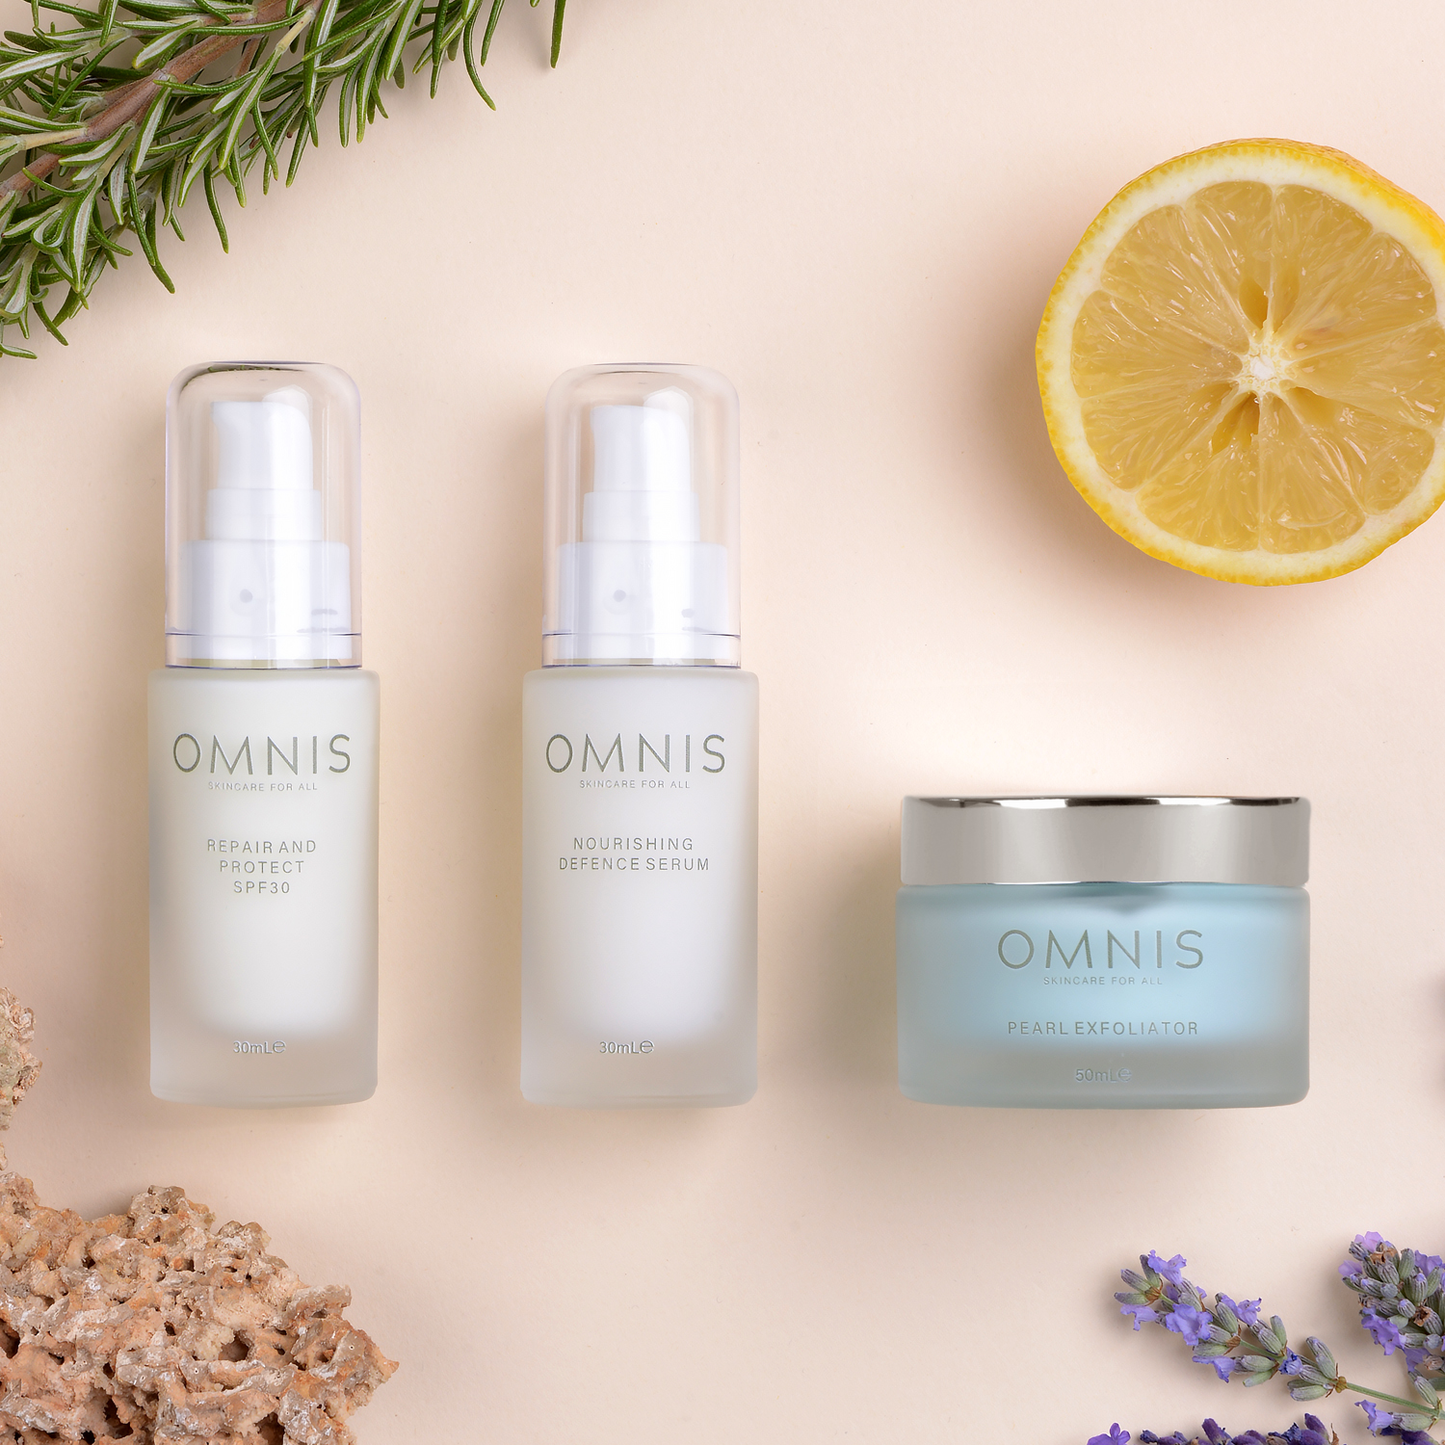 Omni Skincare set. displayed on on peach background is the 2 glass bottles a jars laid flat surrounded by lavender, rosemary and a lemon slice in each corner